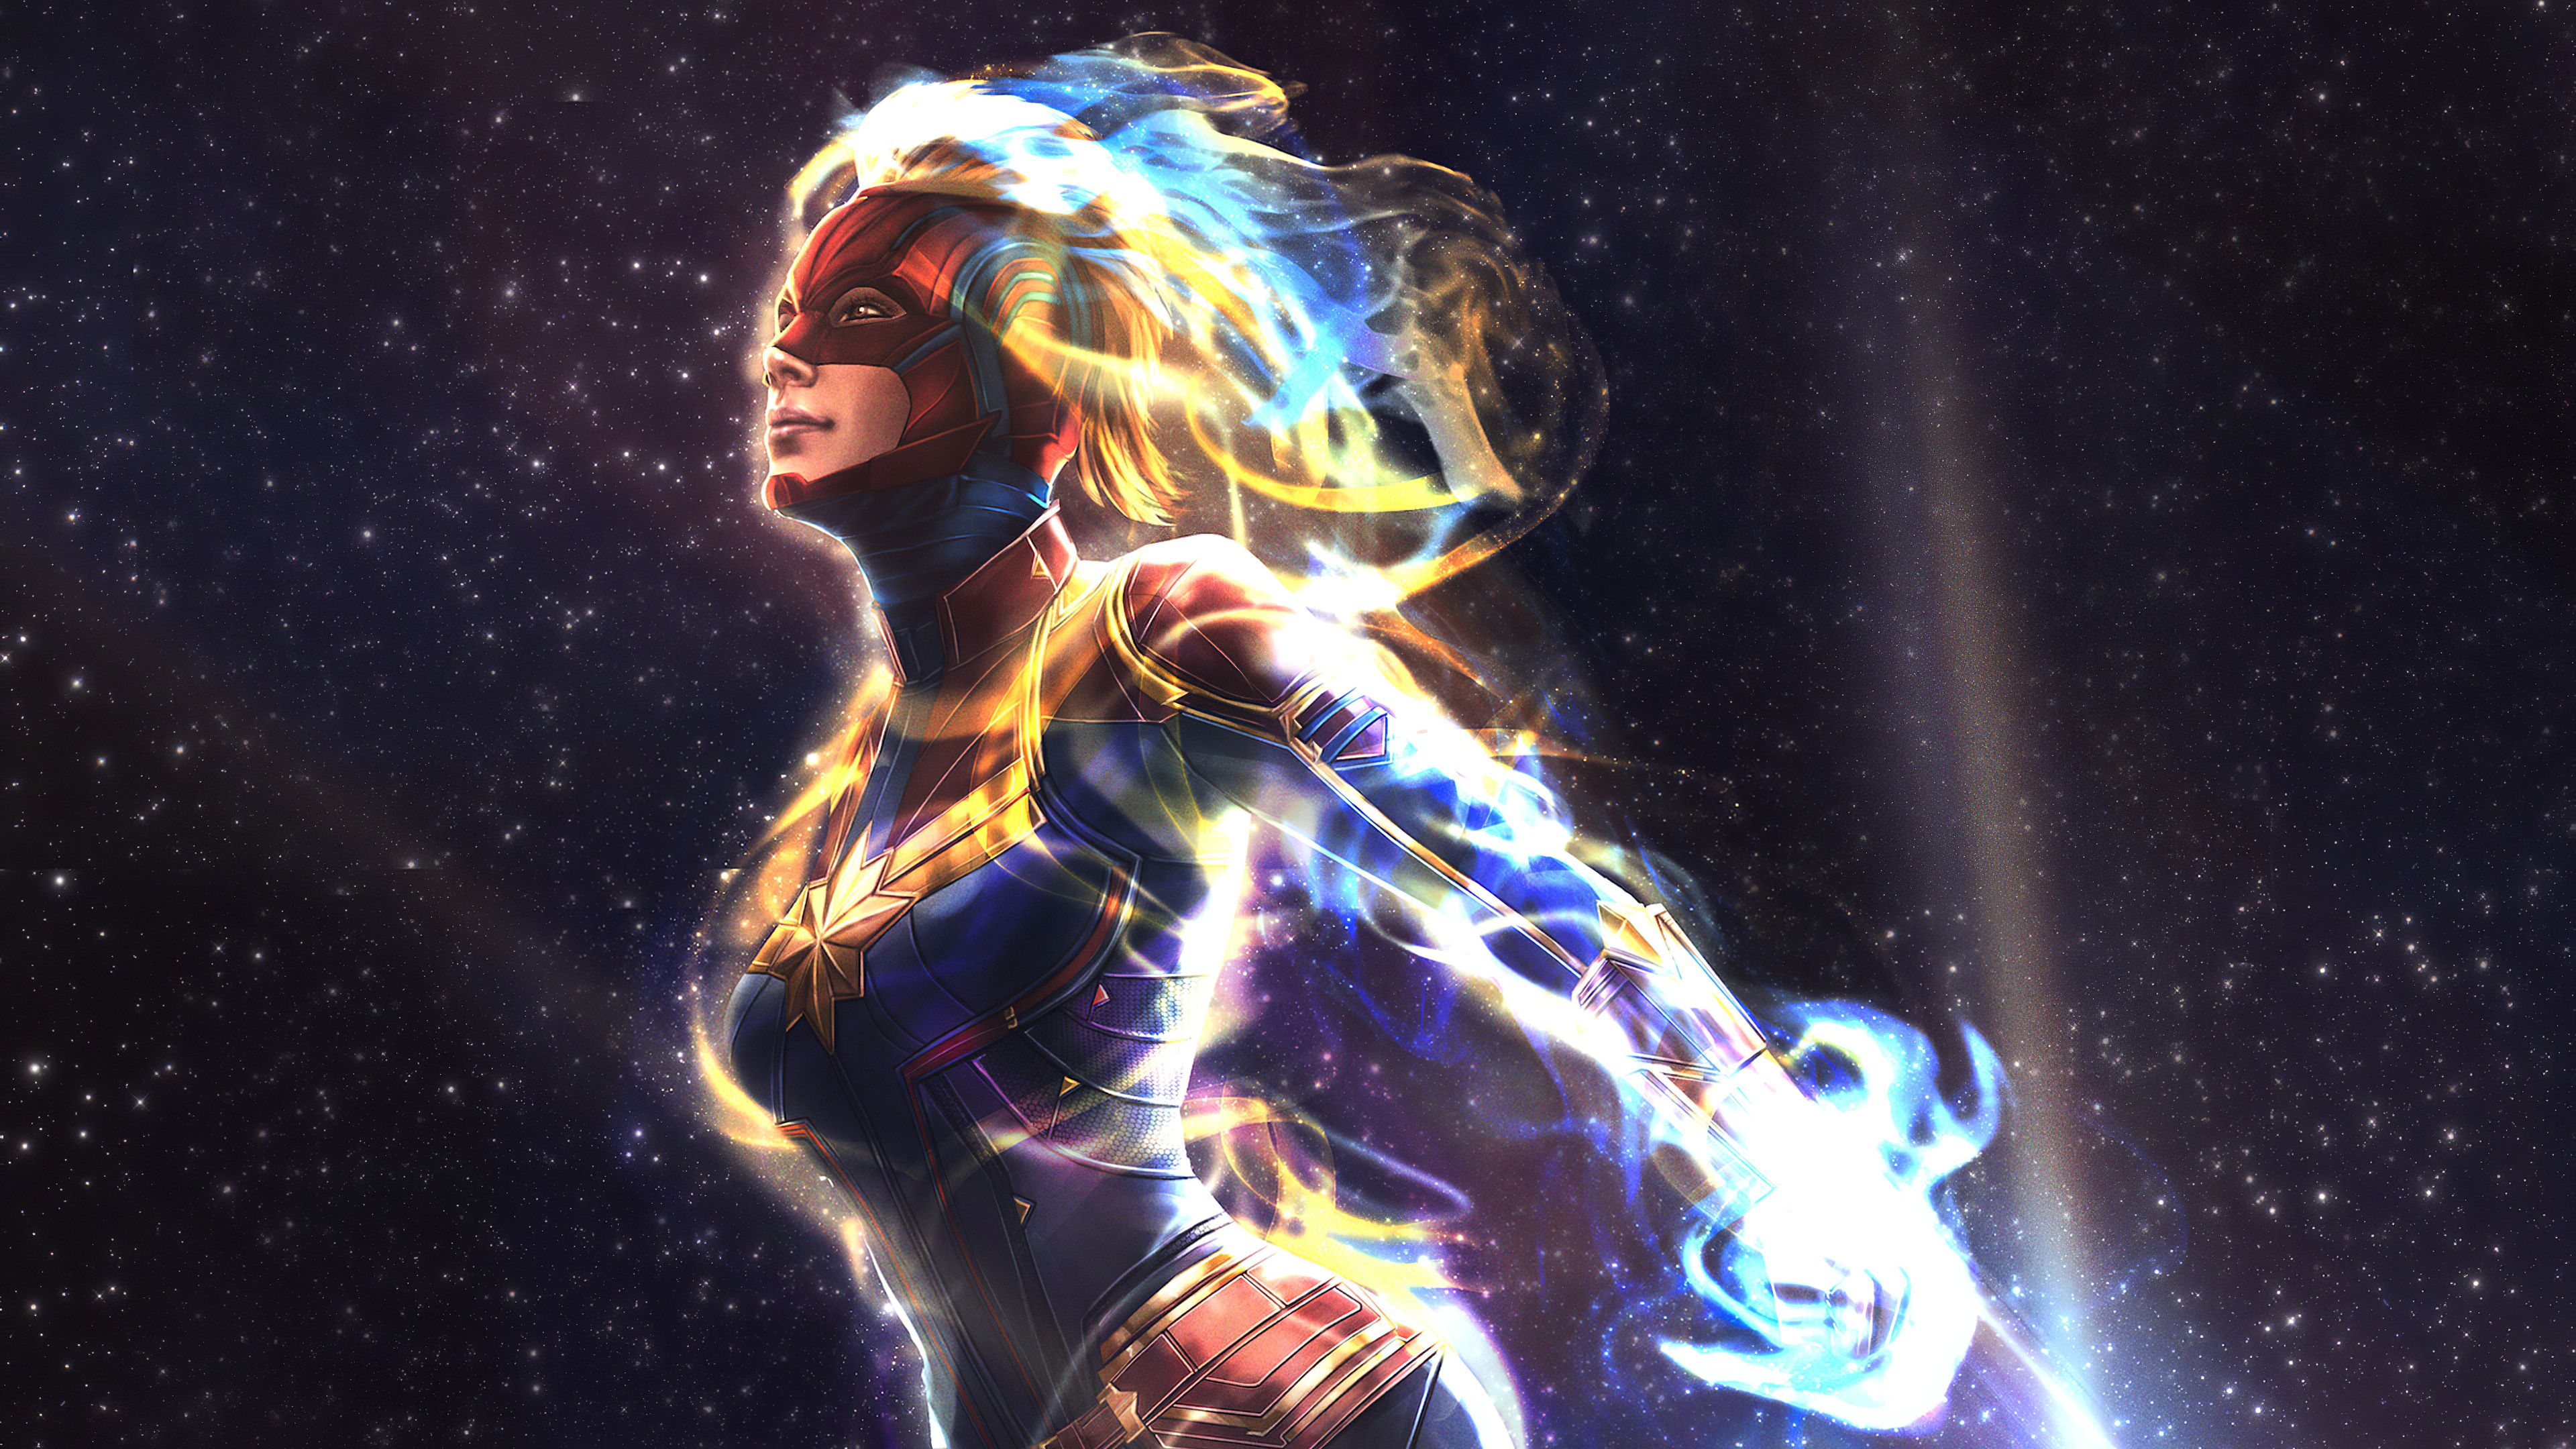 Captain Marvel Fly Away, HD Superheroes, 4k Wallpapers, Image, Backgrounds,...